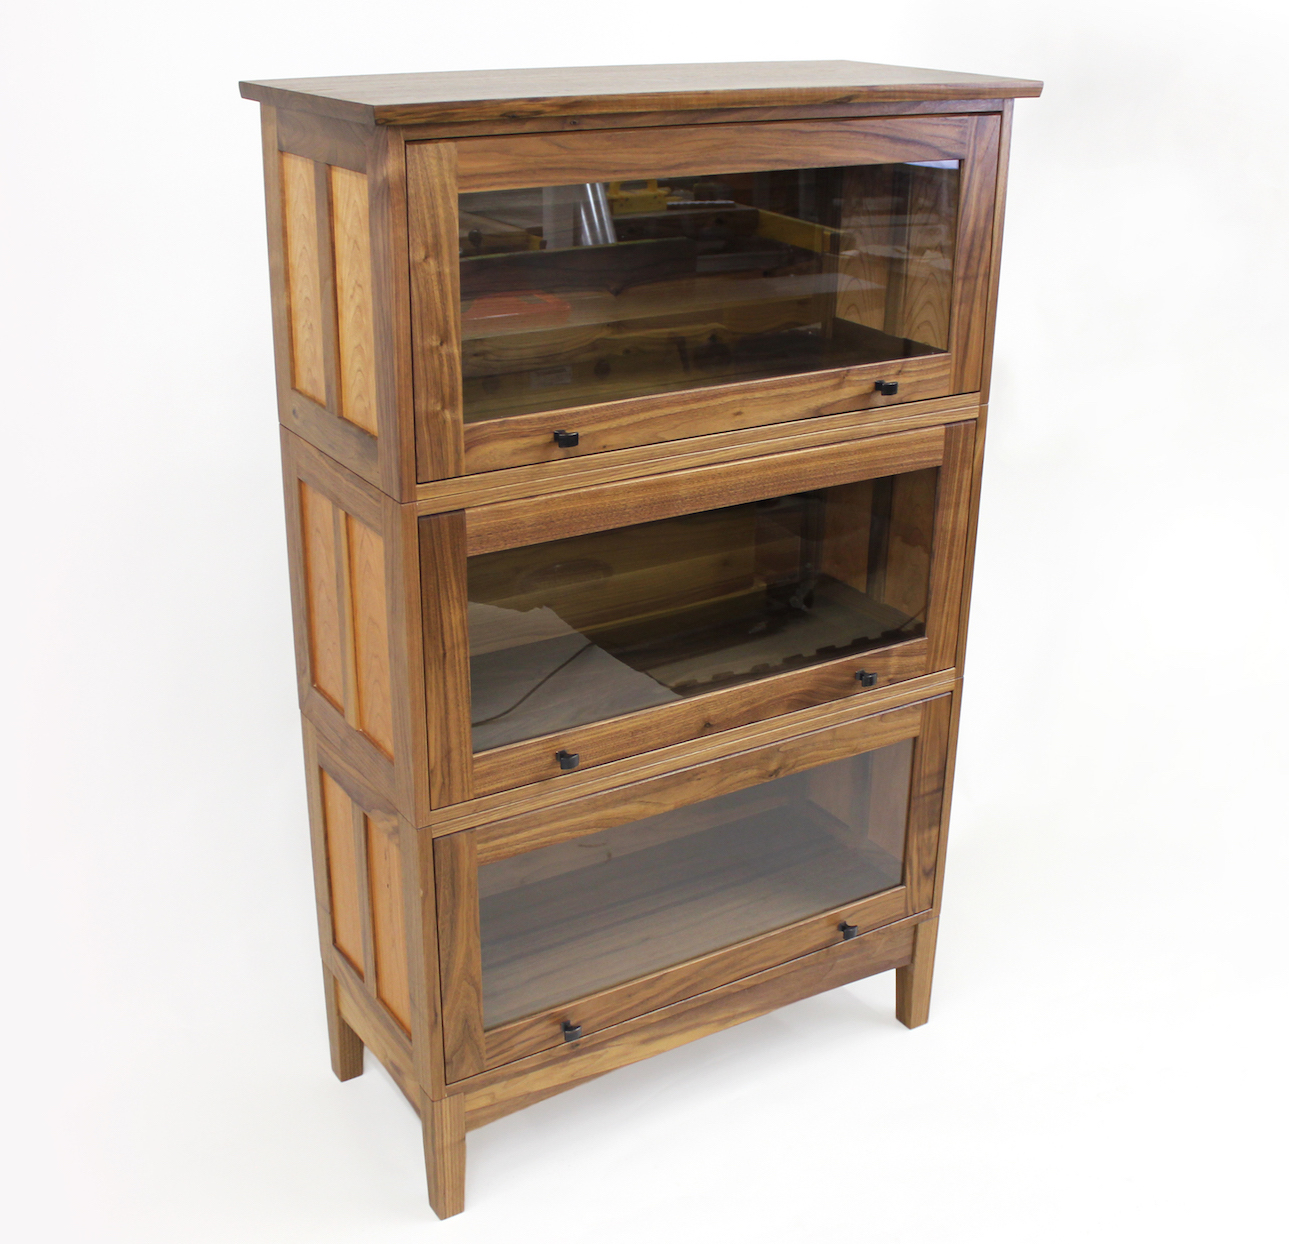 273 - Barrister's Bookcase - The Wood Whisperer